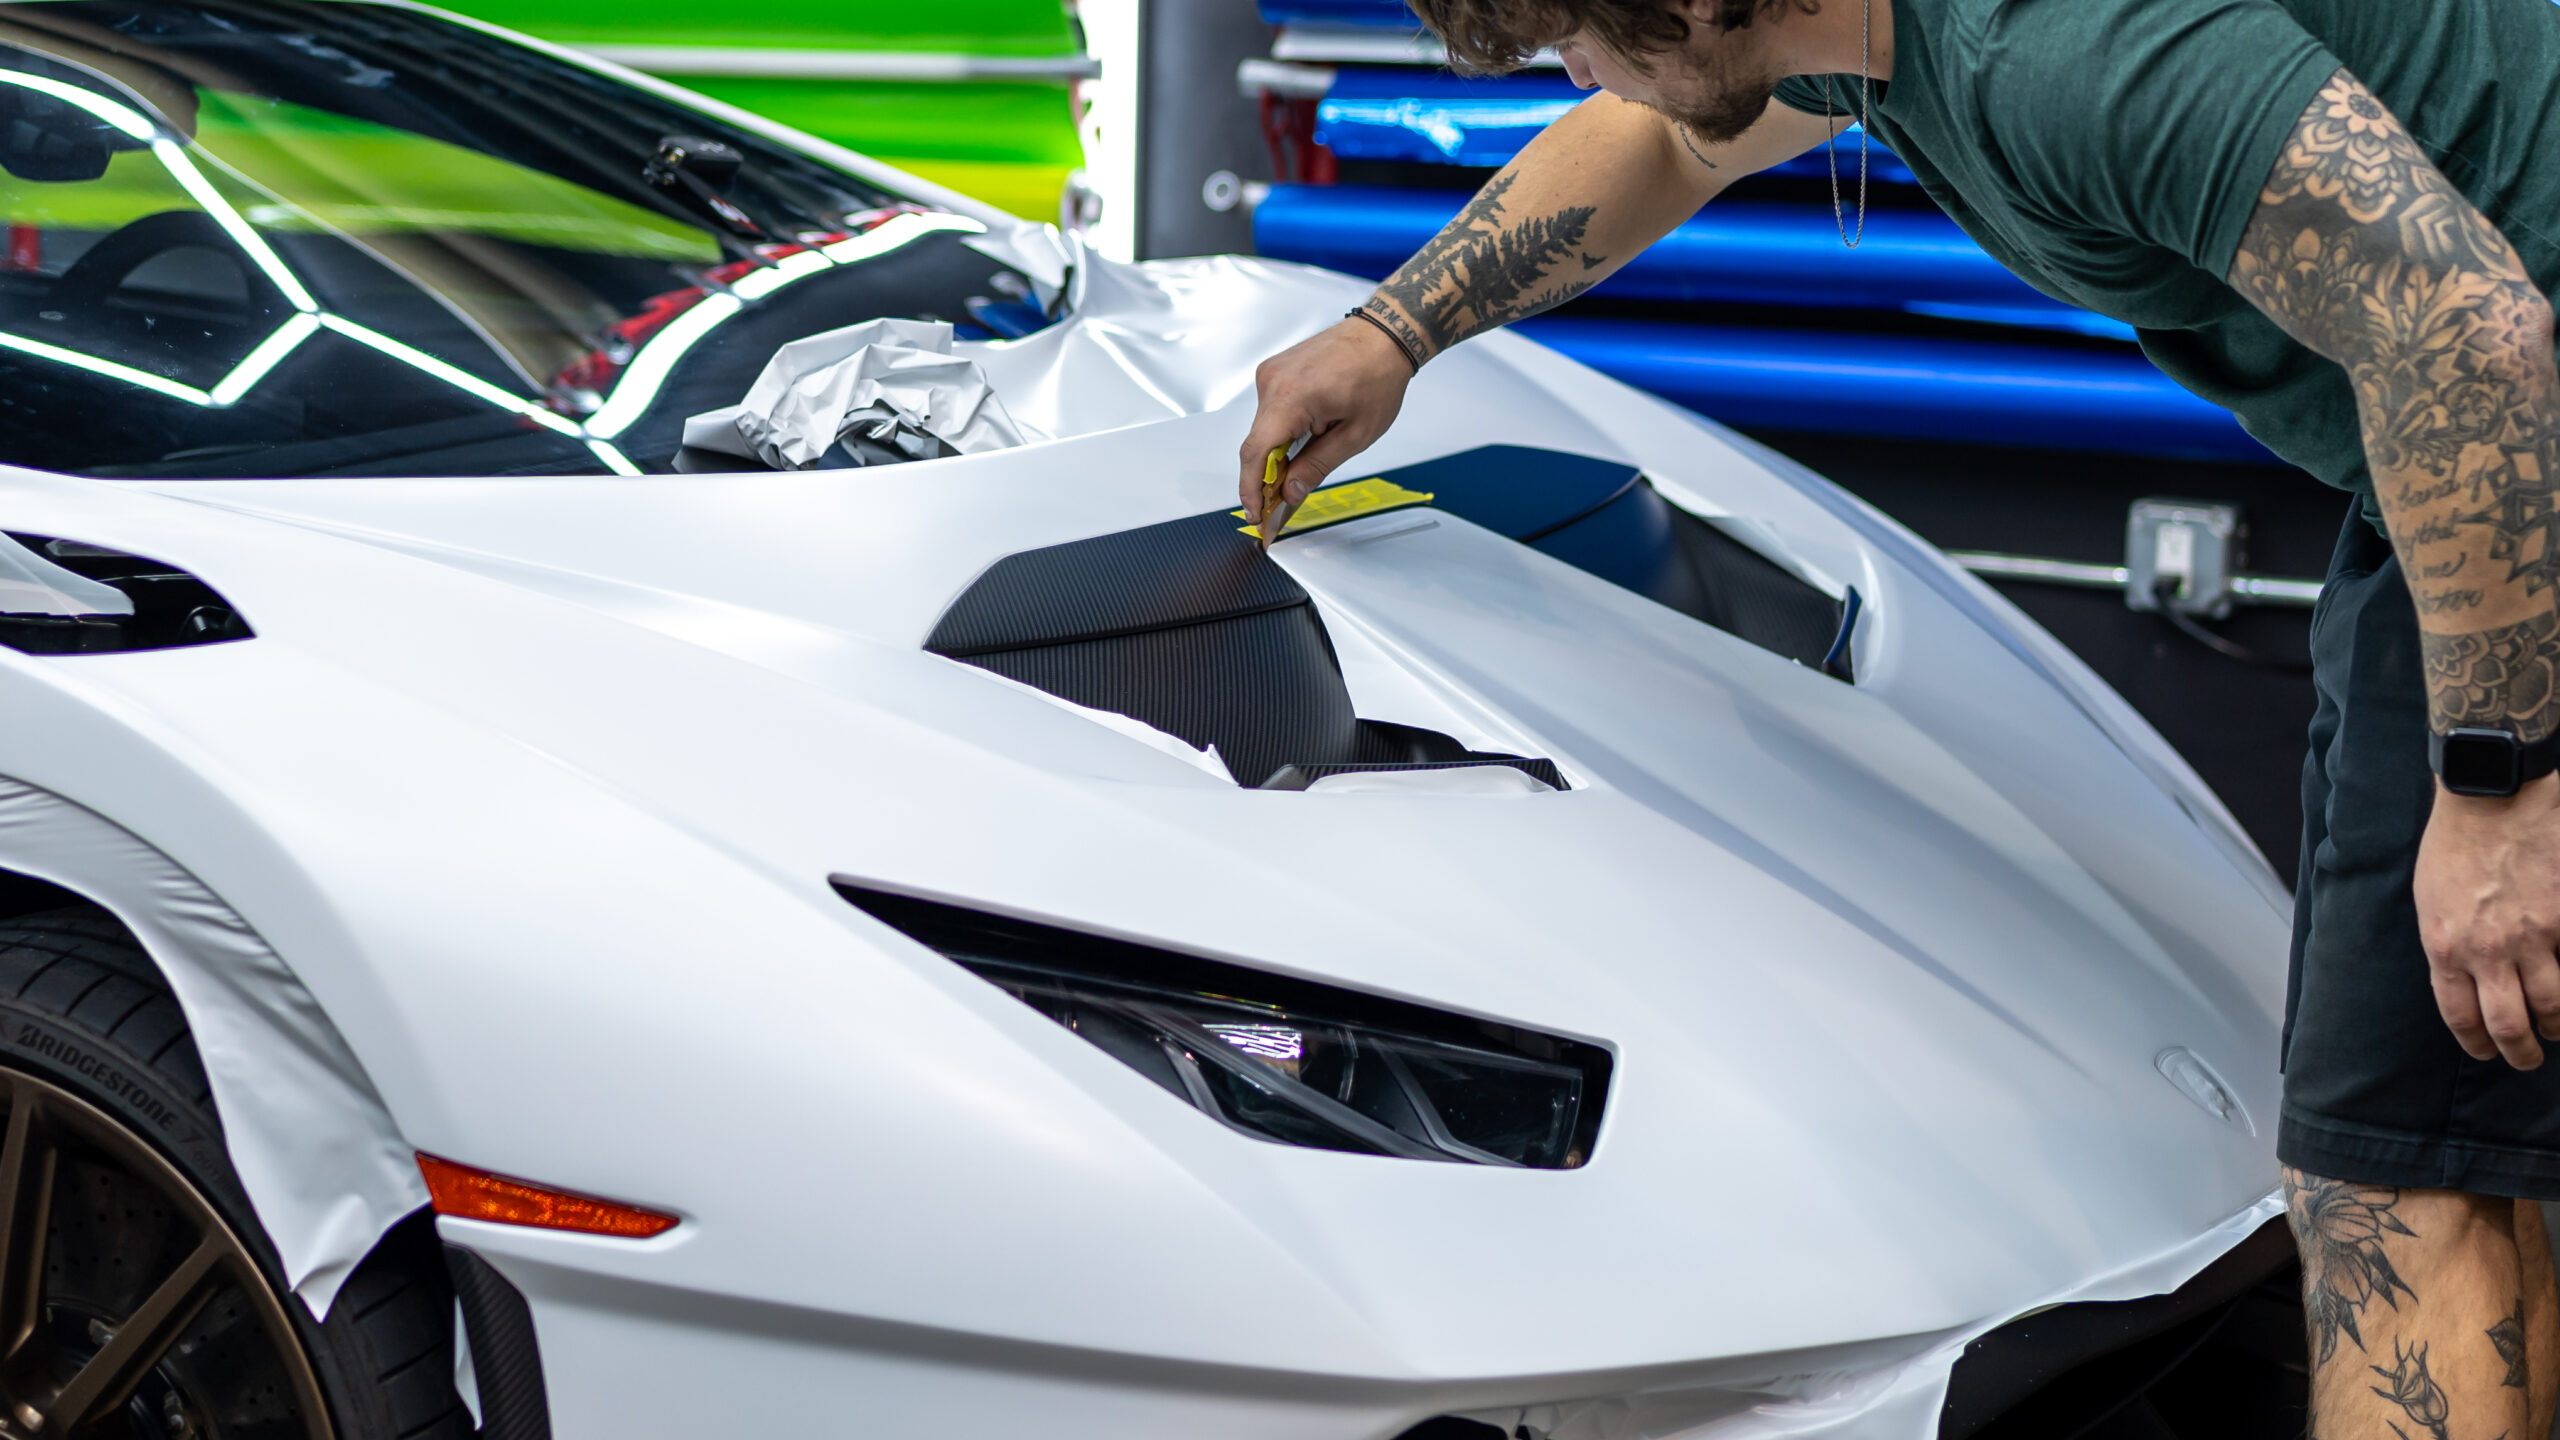 Wrapping the Lamborghini Huracan STO, wrapping the vinyl around the edges of the hood